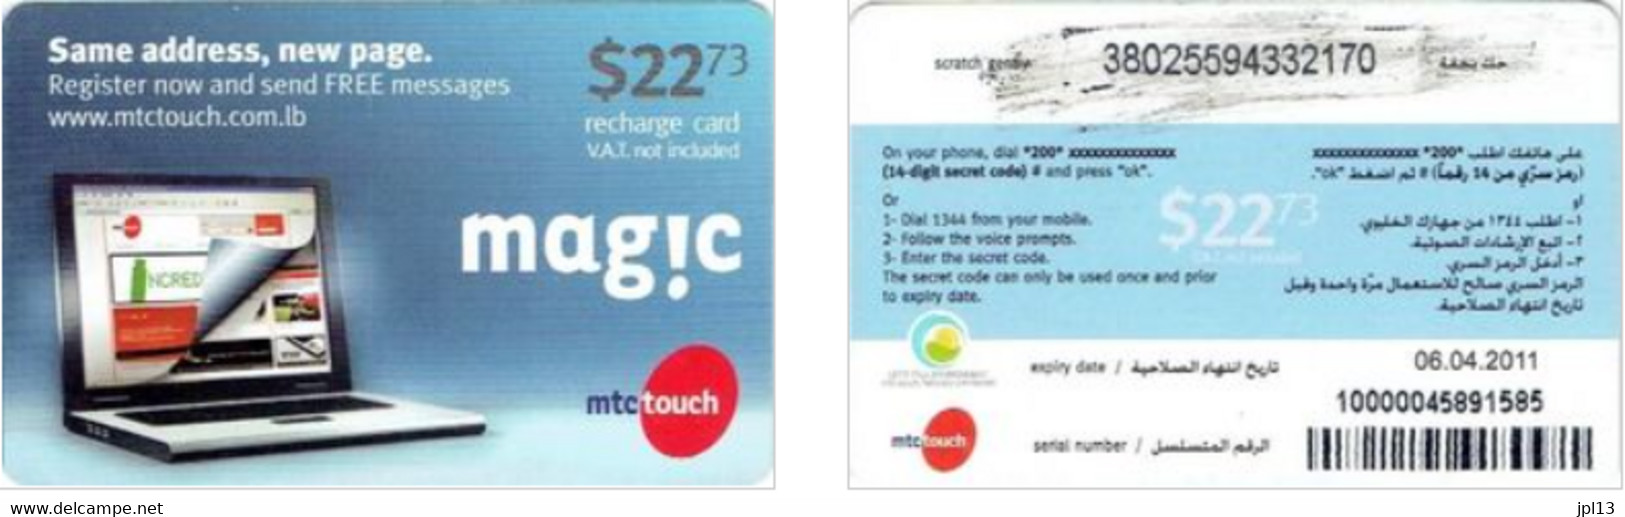 Recharge GSM - Liban - MTC Touch - Magic - Computer $22,73, Exp. 22/01/2012 - Líbano